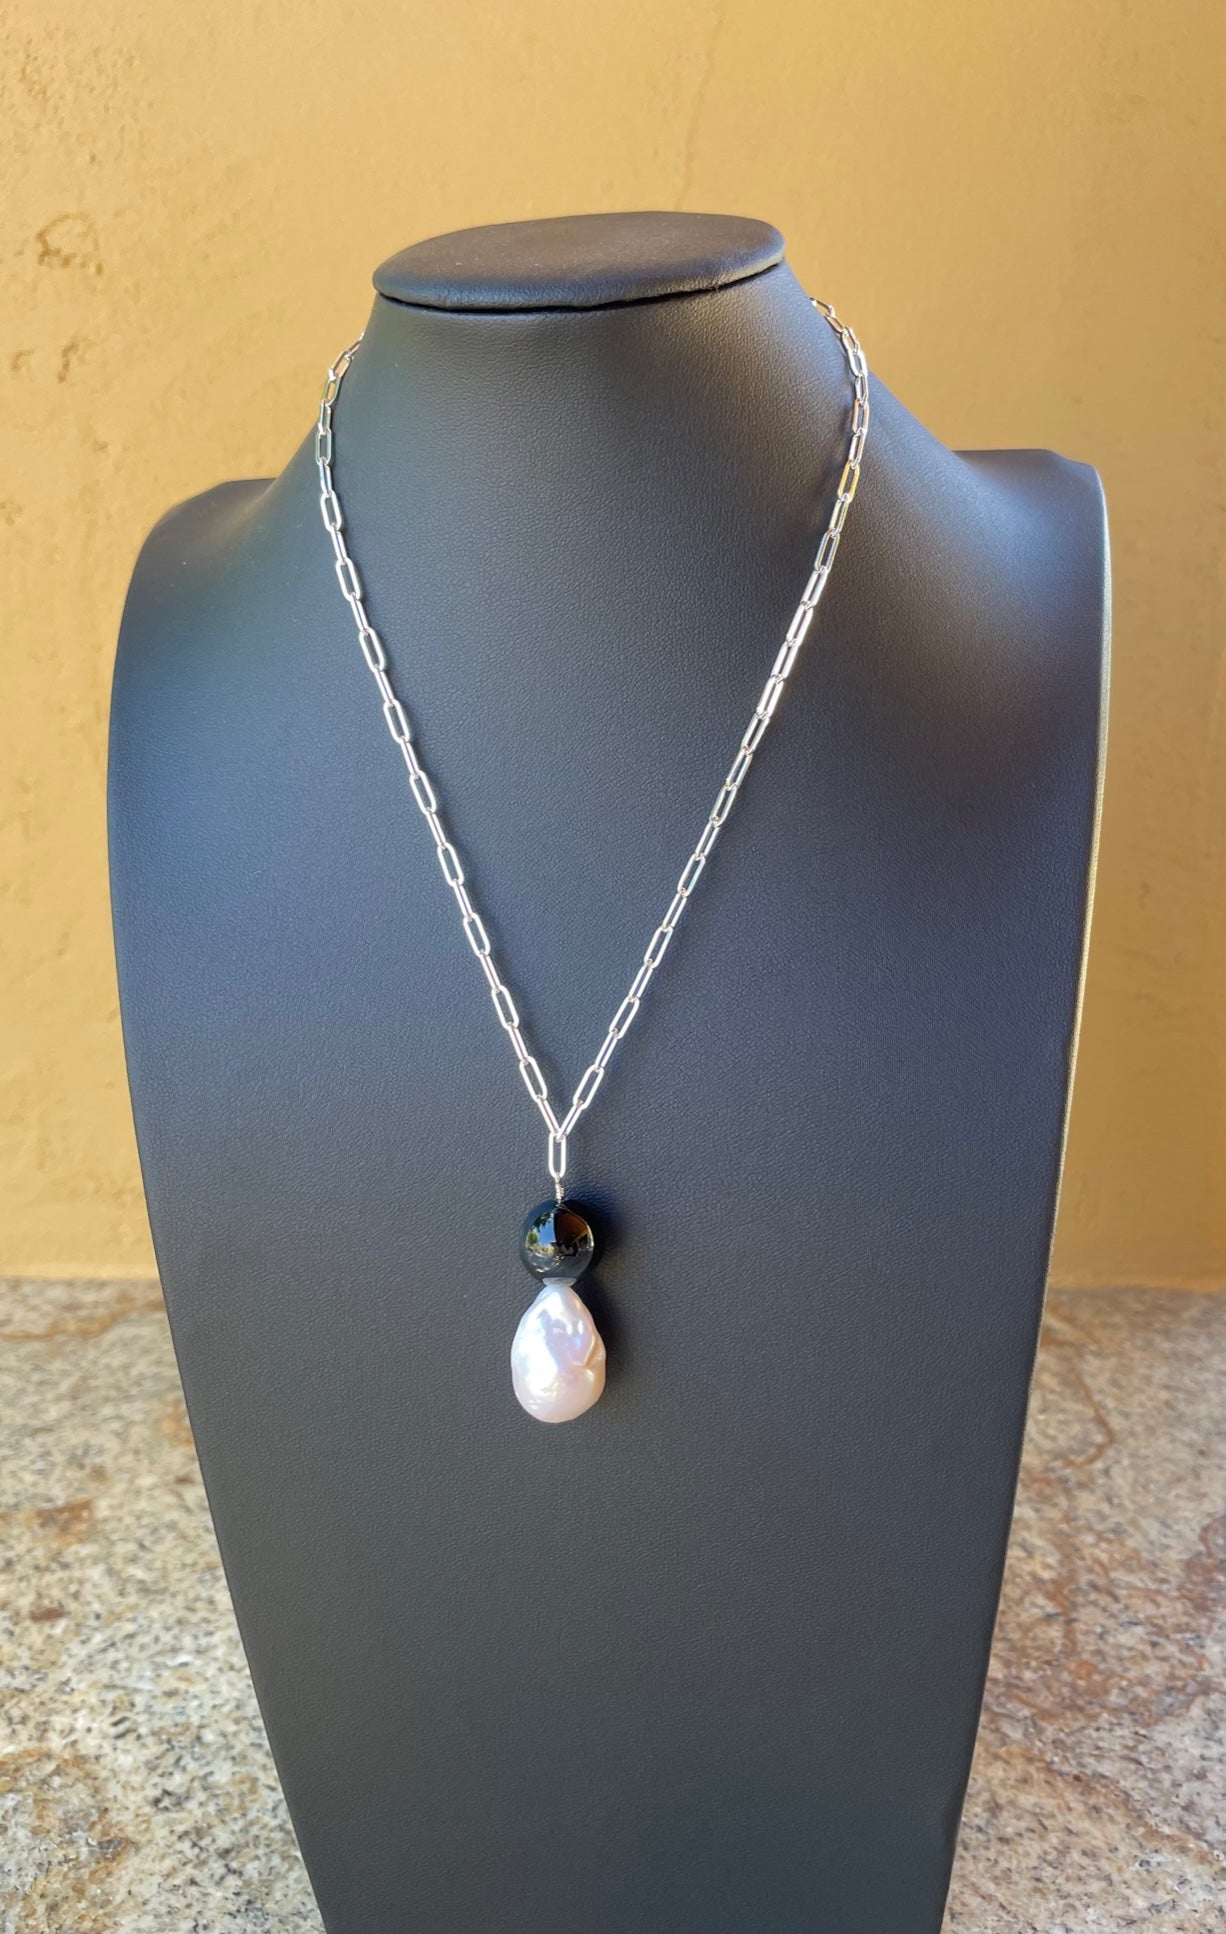 Necklace - Sterling silver chain with a white pearl and black onyx pendant